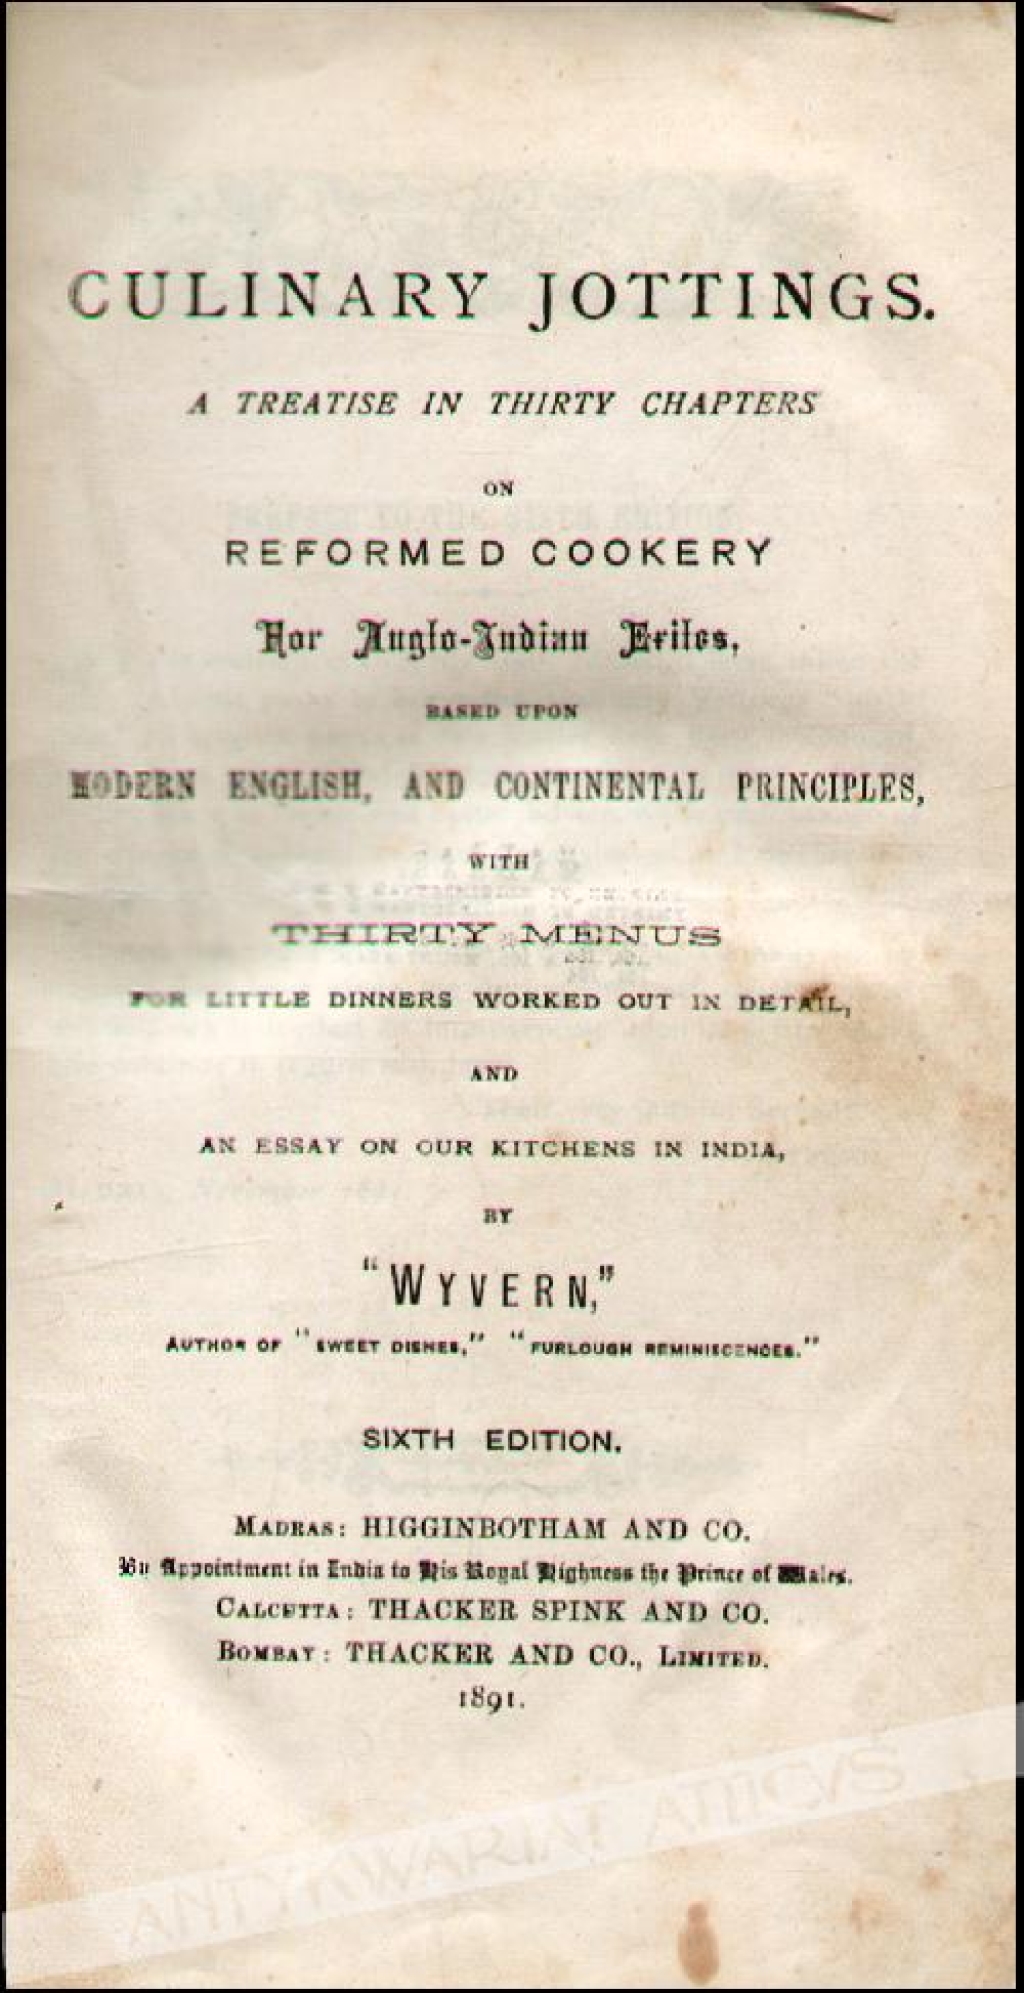 Culinary Jottings. A Treatise in Thirty Chapters on Reformed Cookery for Anglo-Indian Erites, Based Upon Modern English, and Continental Principles with Thirty Menus for little dinners worked out in detail, and an essay on our kitchens in India